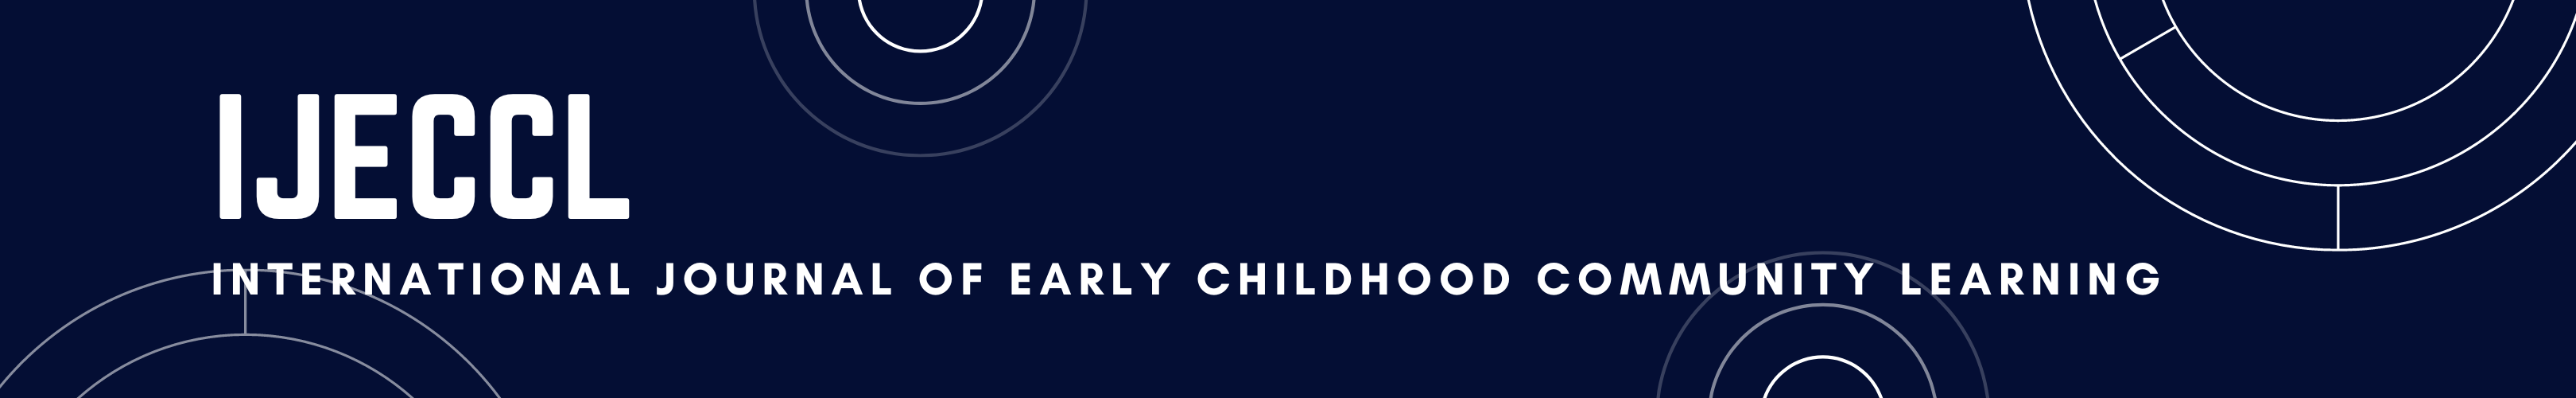 Journals International Journal of Early Childhood Community Learning